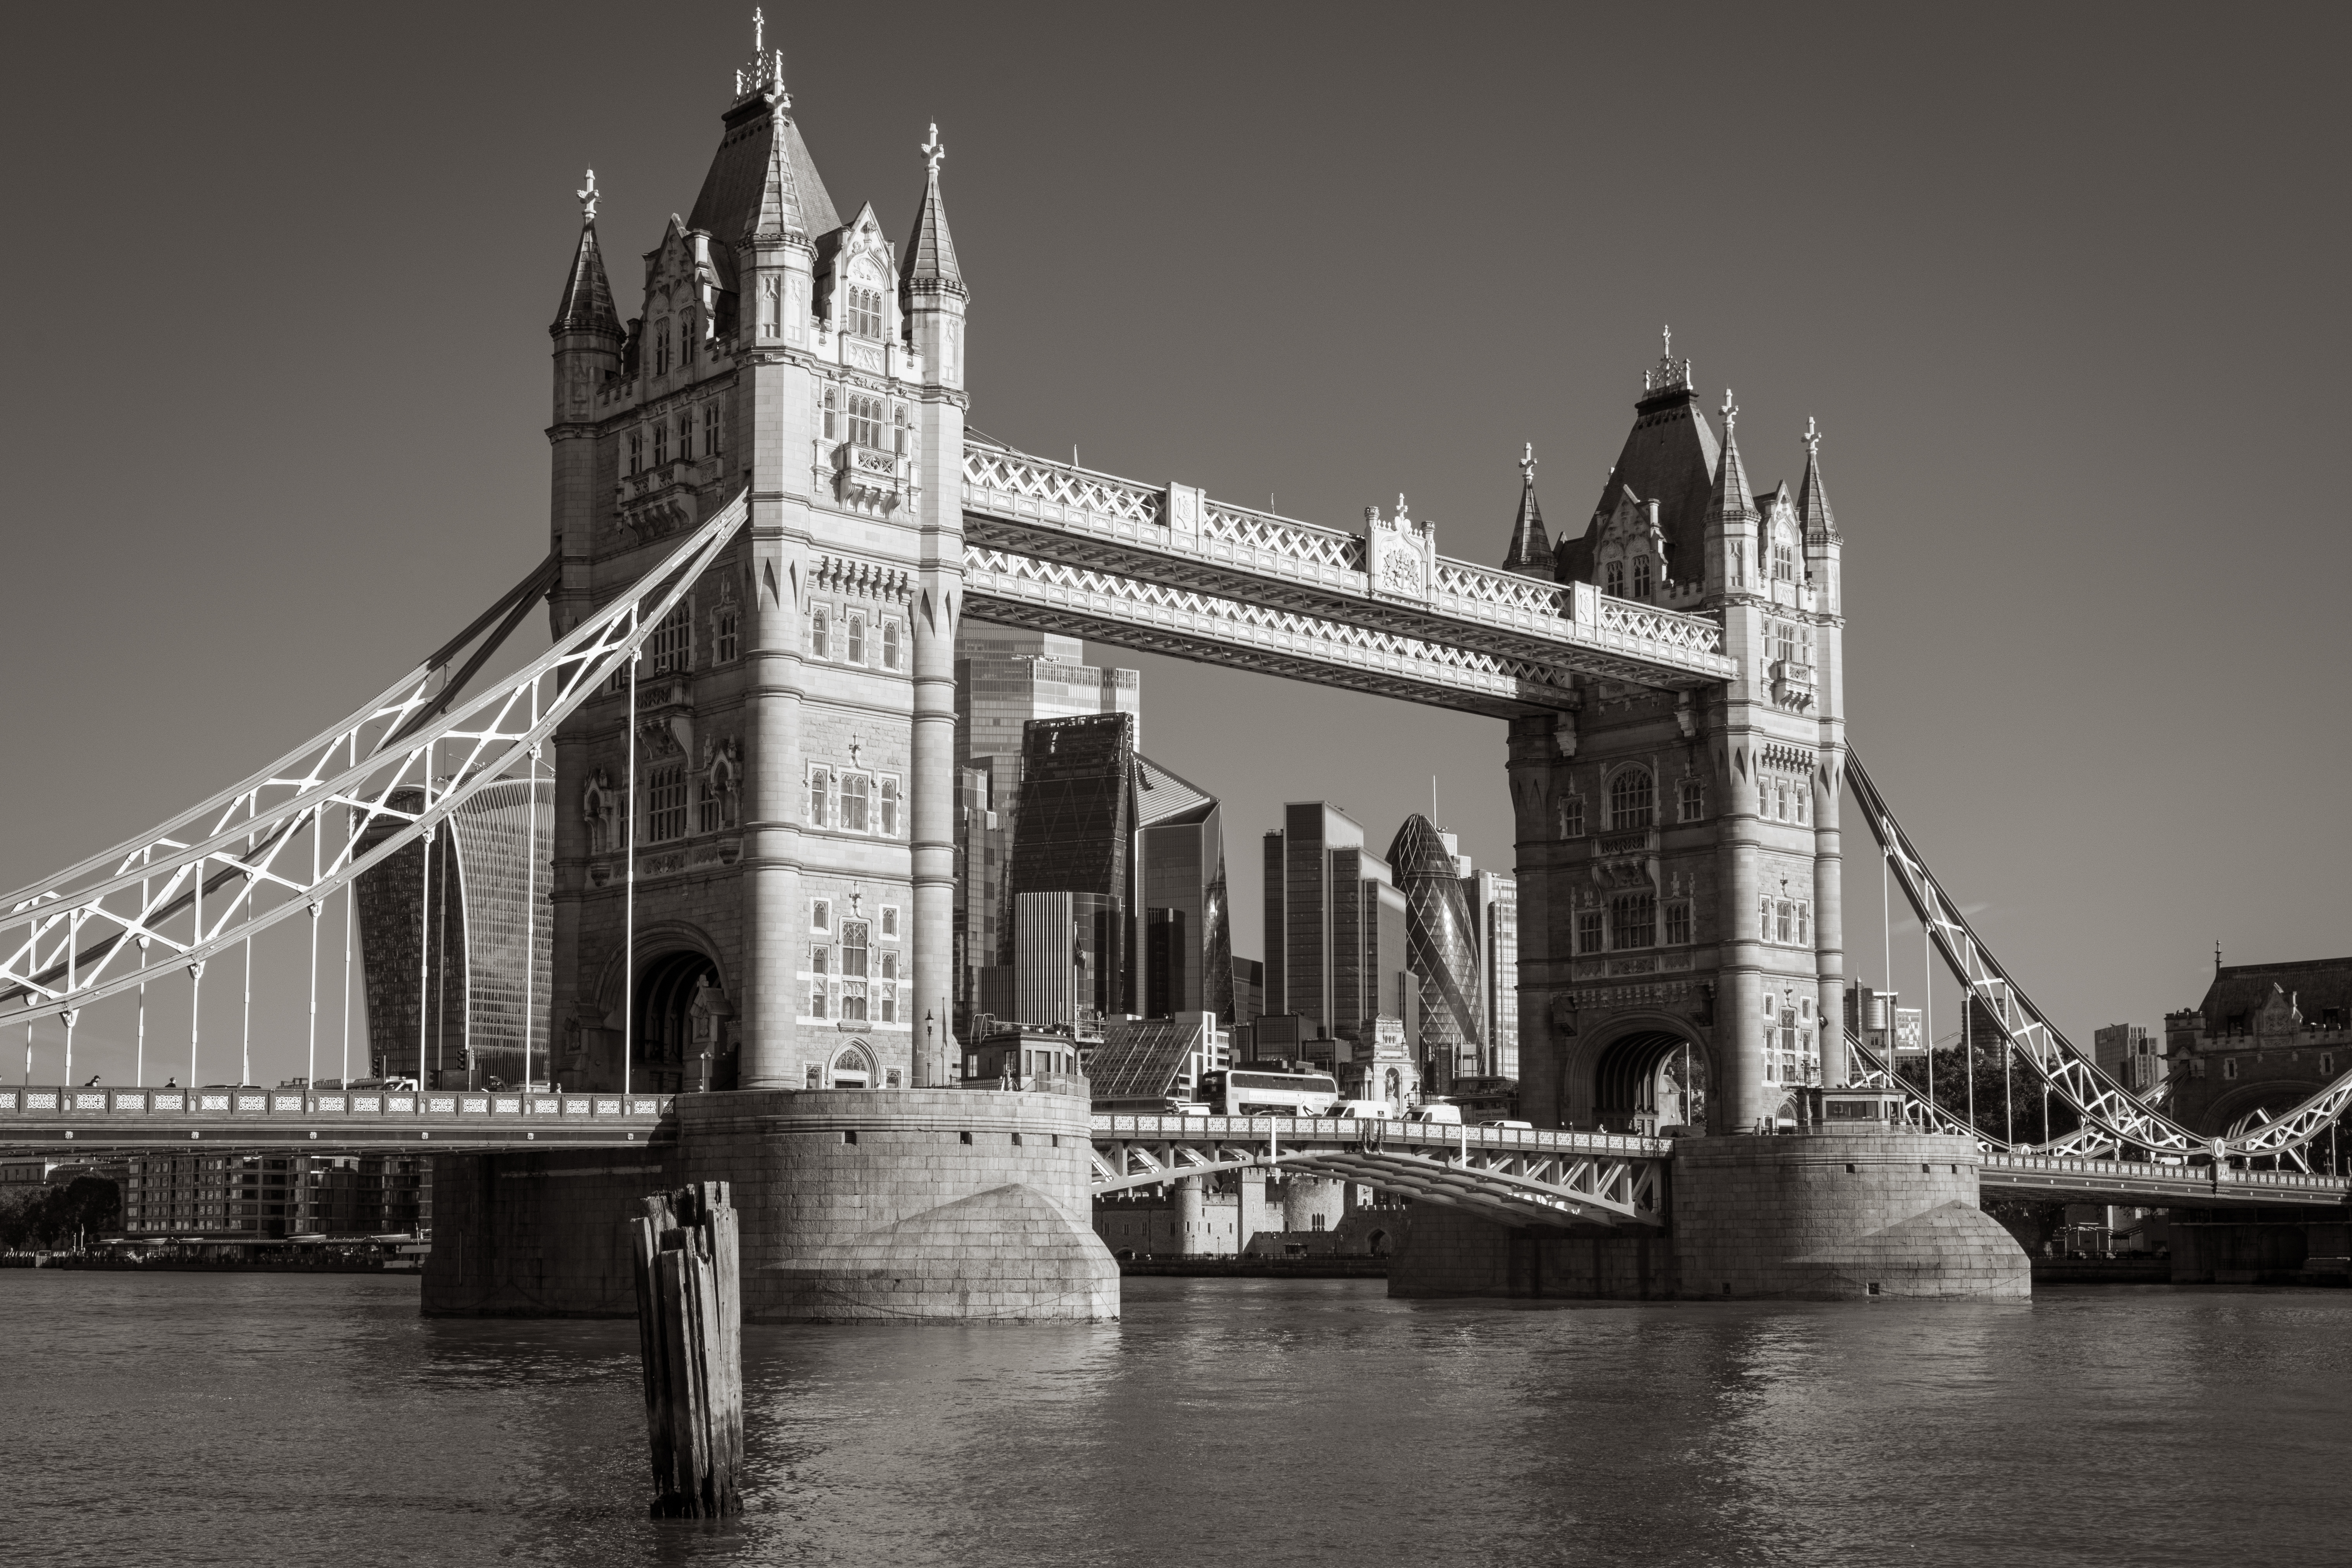 Pentax K-3 Mark III Monochrome Tower Bridge sample image shot with red filter and toned in Adobe Camera Raw 